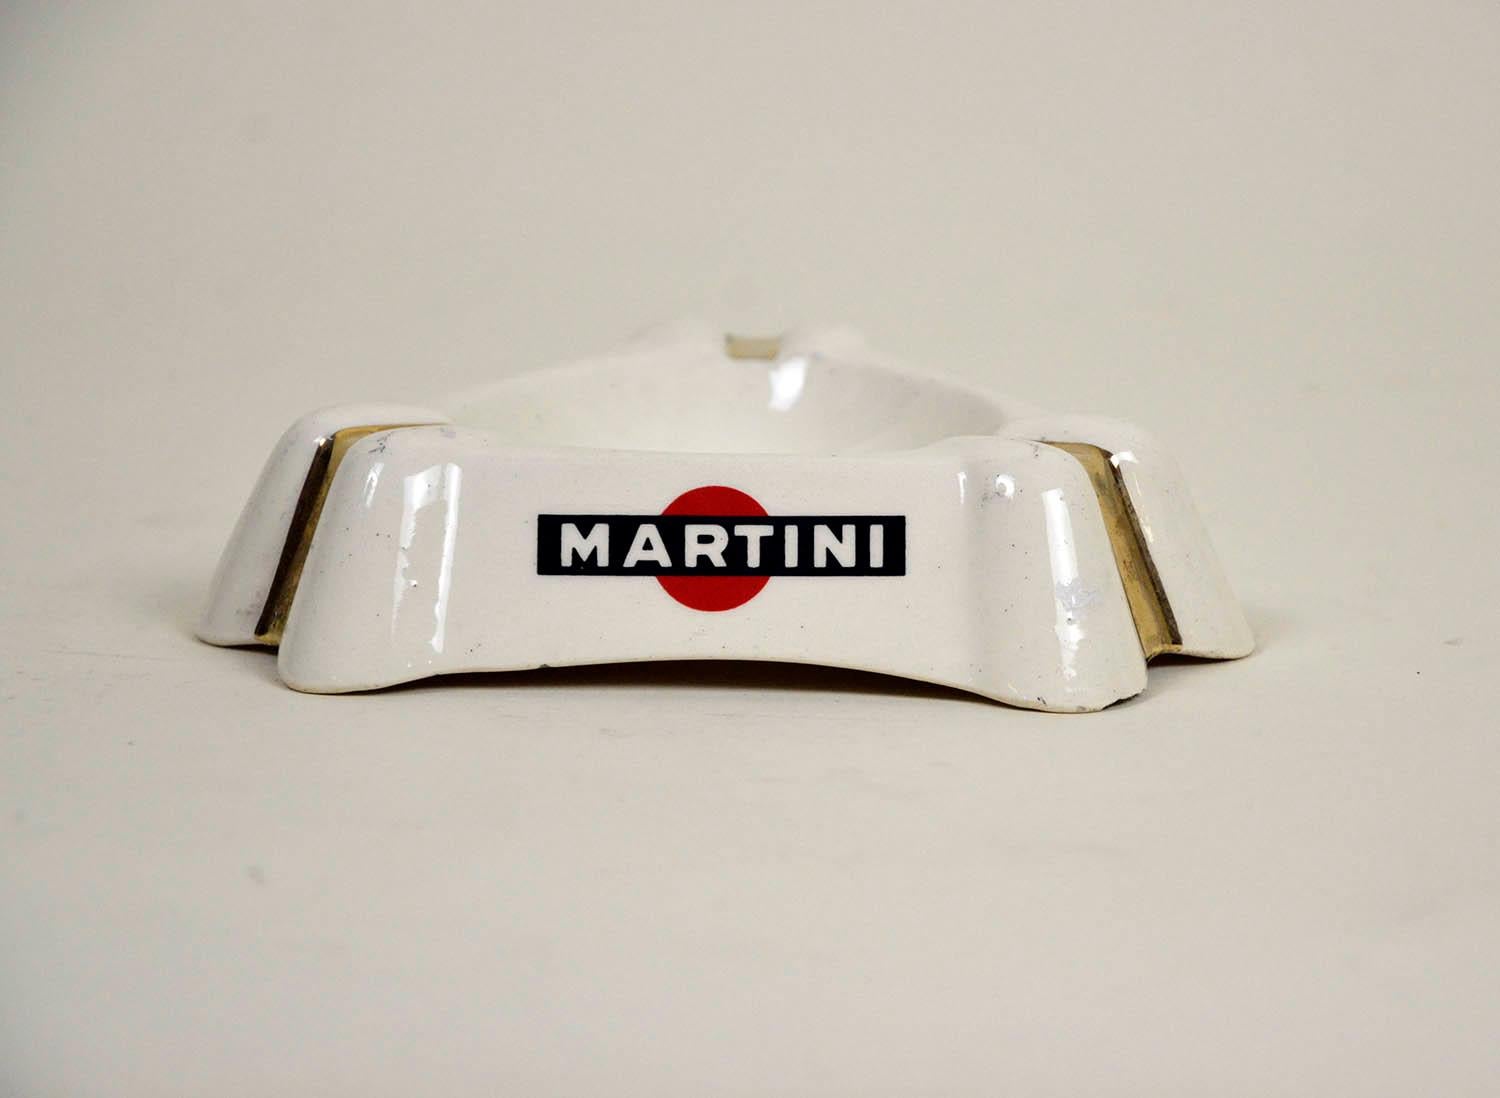 1950s French white triangular ashtray with gold details and Martini logo on all three sides, in demi porcellaine by Badonivillier France.

Collector's note:

Martini is a brand of Italian vermouth, named after the Martini & Rossi Distilleria